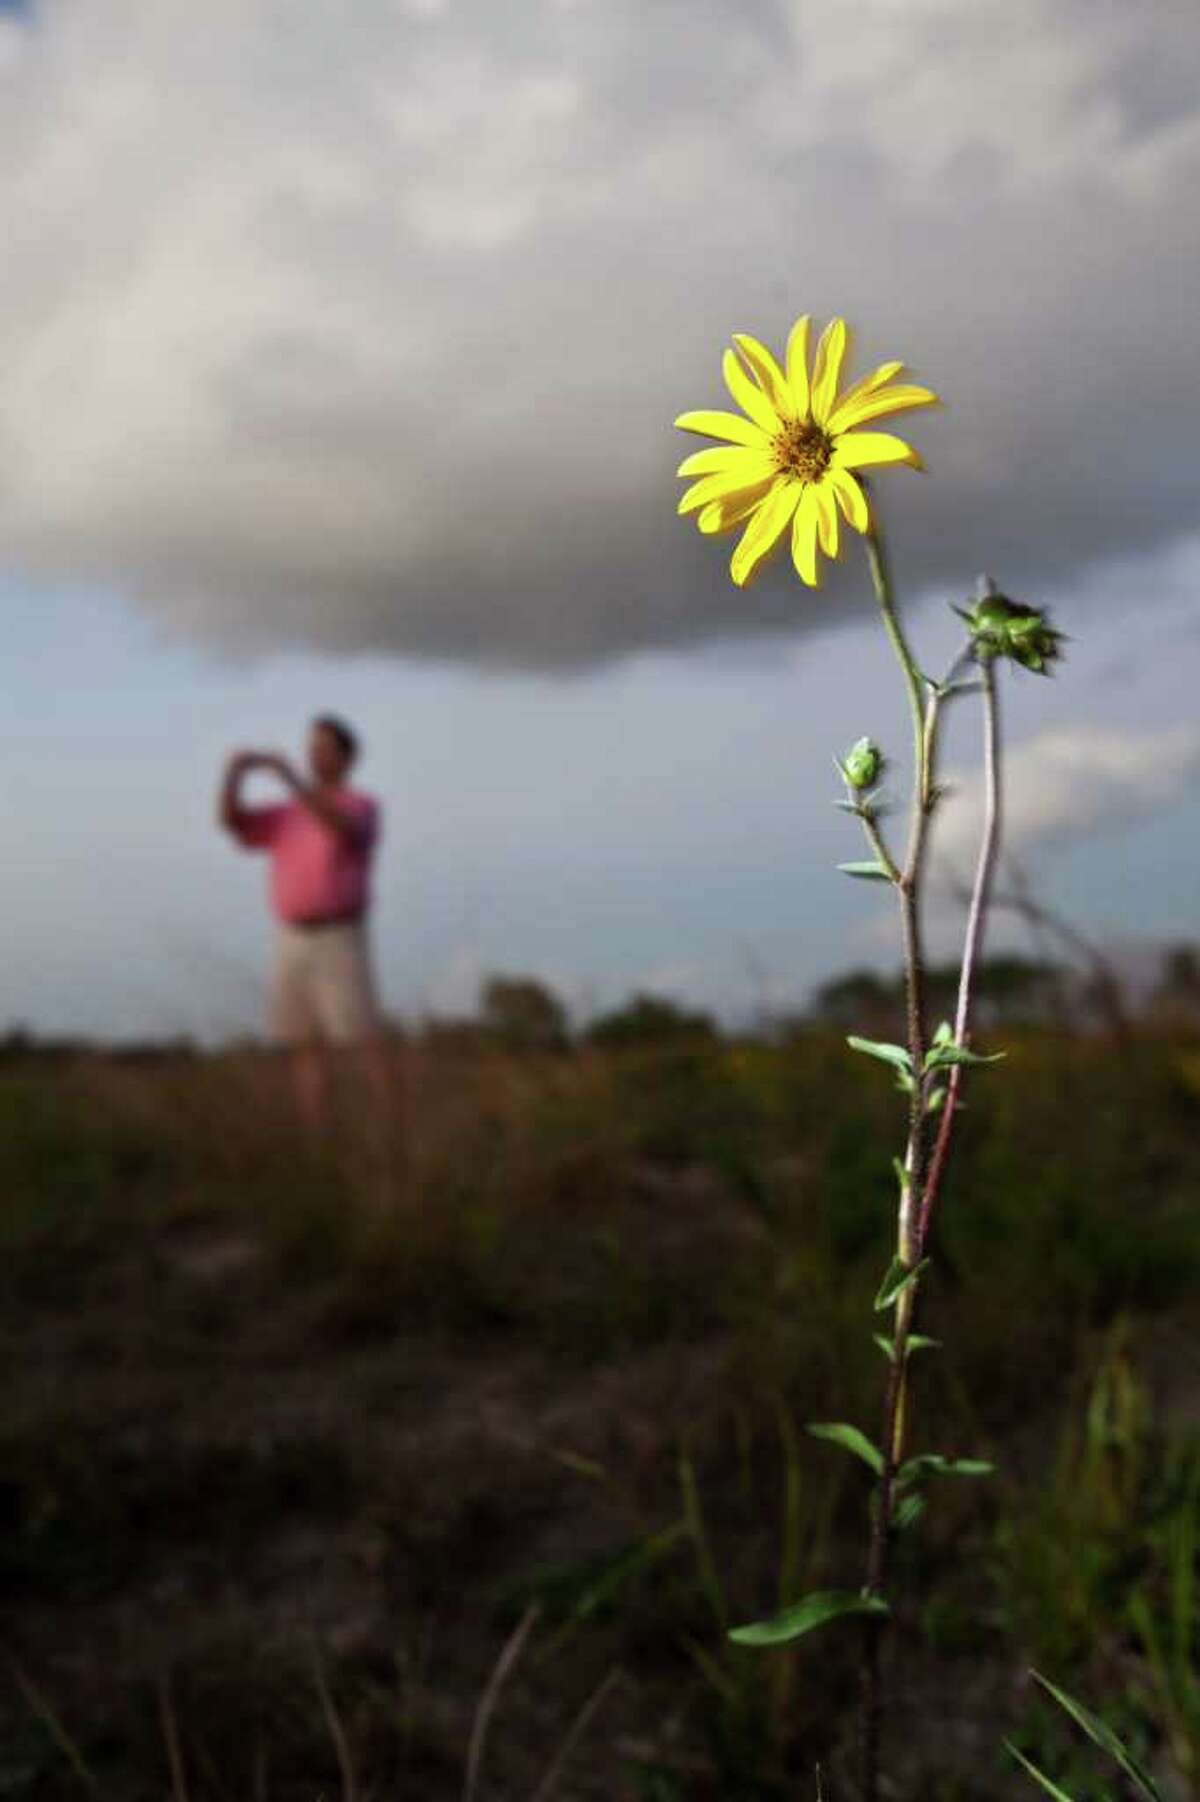 (Eric Kayne/For the Chronicle) XXXXXX: Rosinweed stands as plant enthusiasts scour a pristine coastal prairie off Spencer Highway Nov. 2, 2011 in Deer Park, TX. Their goal was to harvest plants and seeds. (Eric Kayne/For the Chronicle)